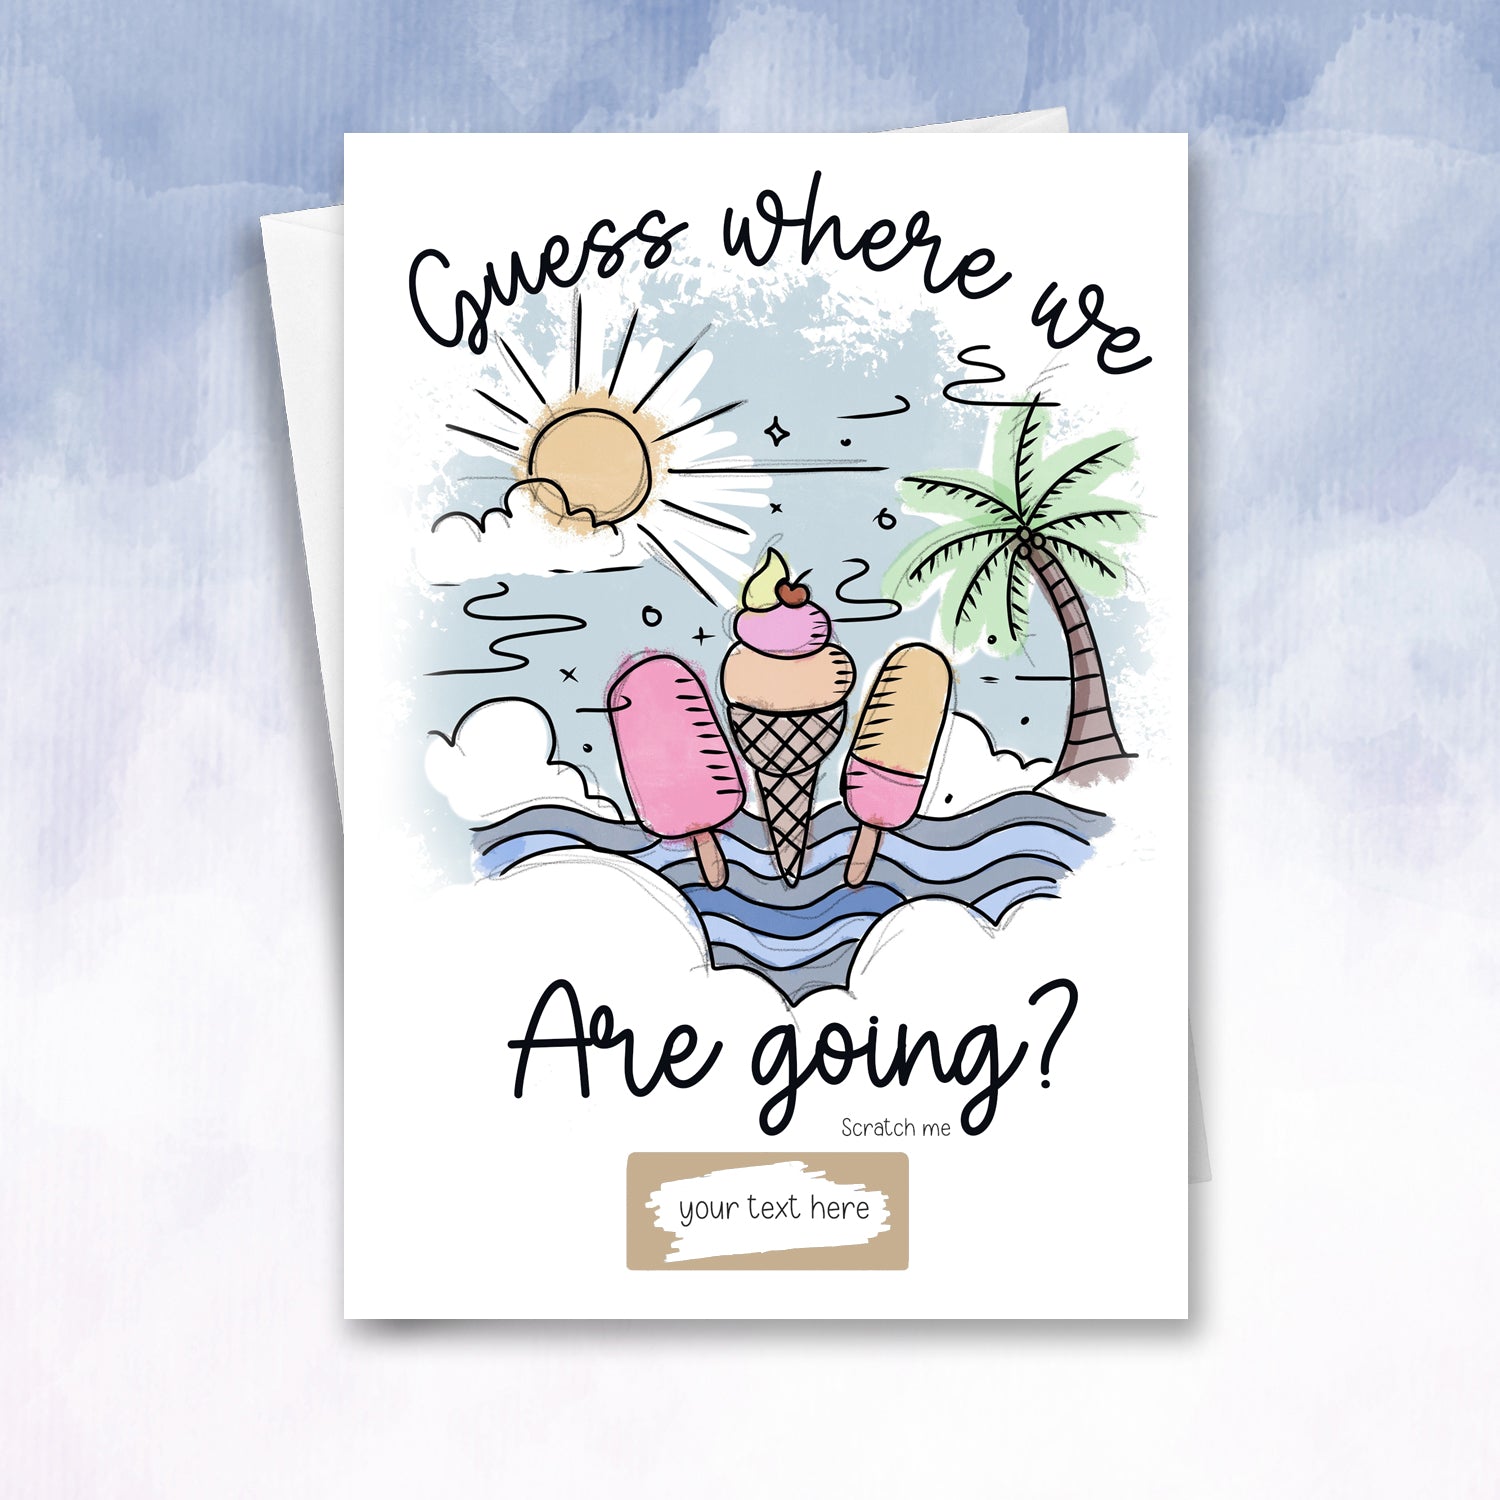 Guess Where we are going on holiday reveal Scratch card - 2f75e5-2